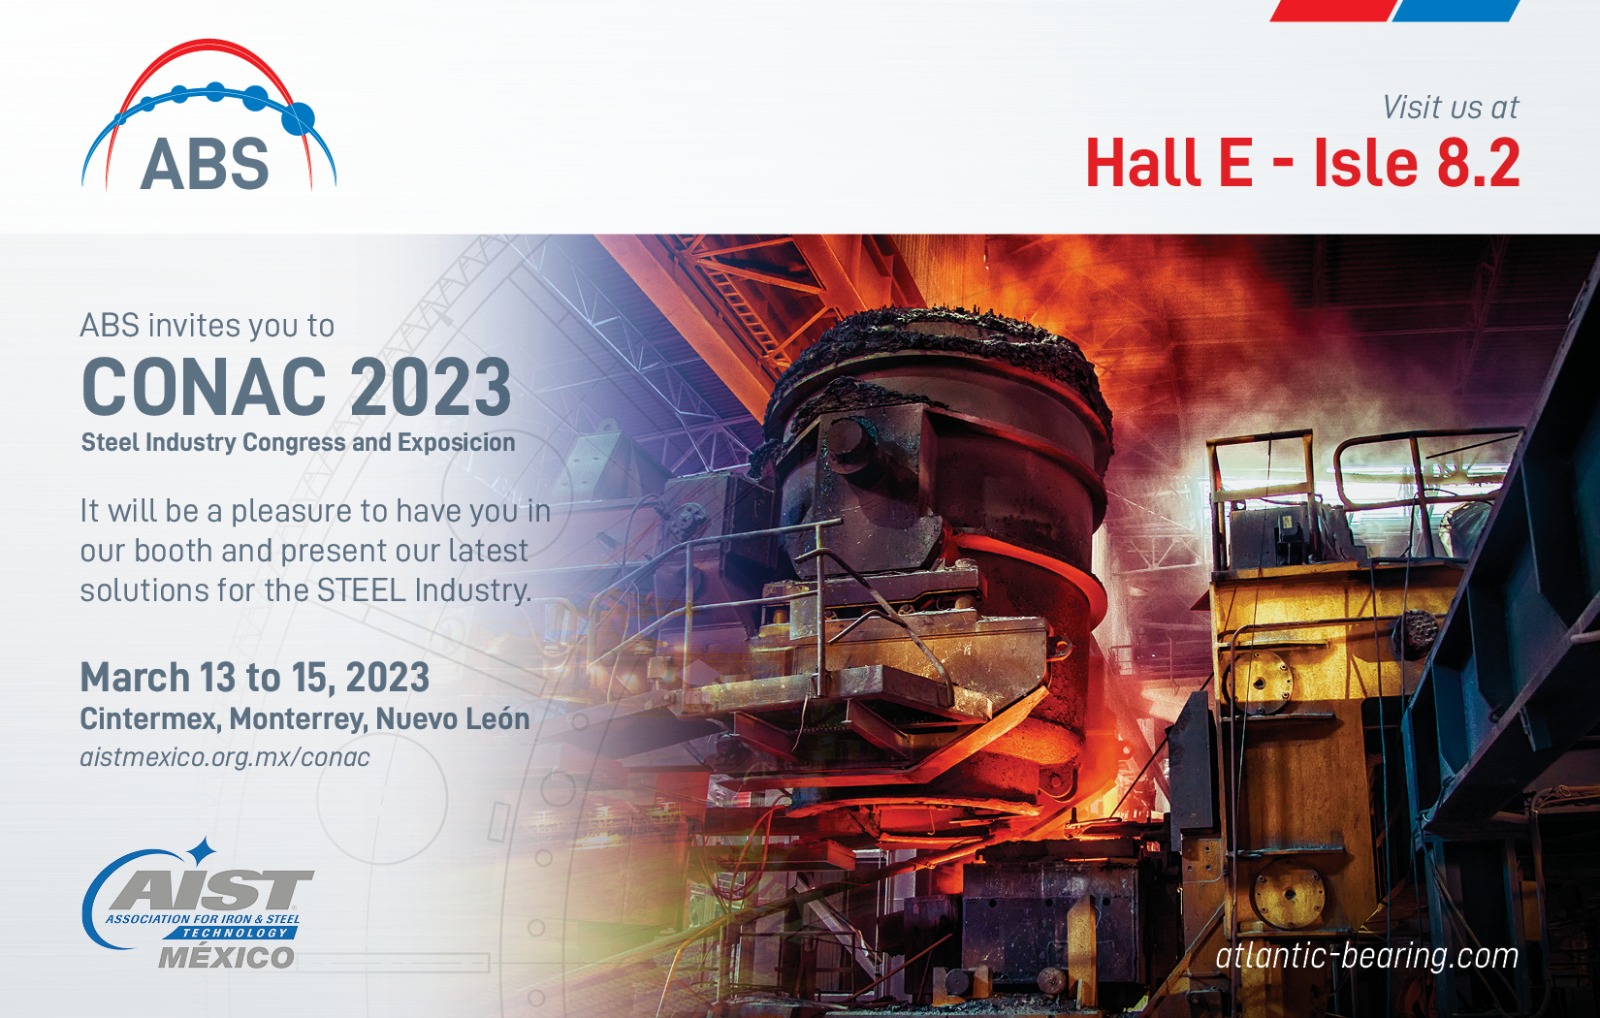 ABS to Showcase Innovative Steel Solutions at CONAC 2023